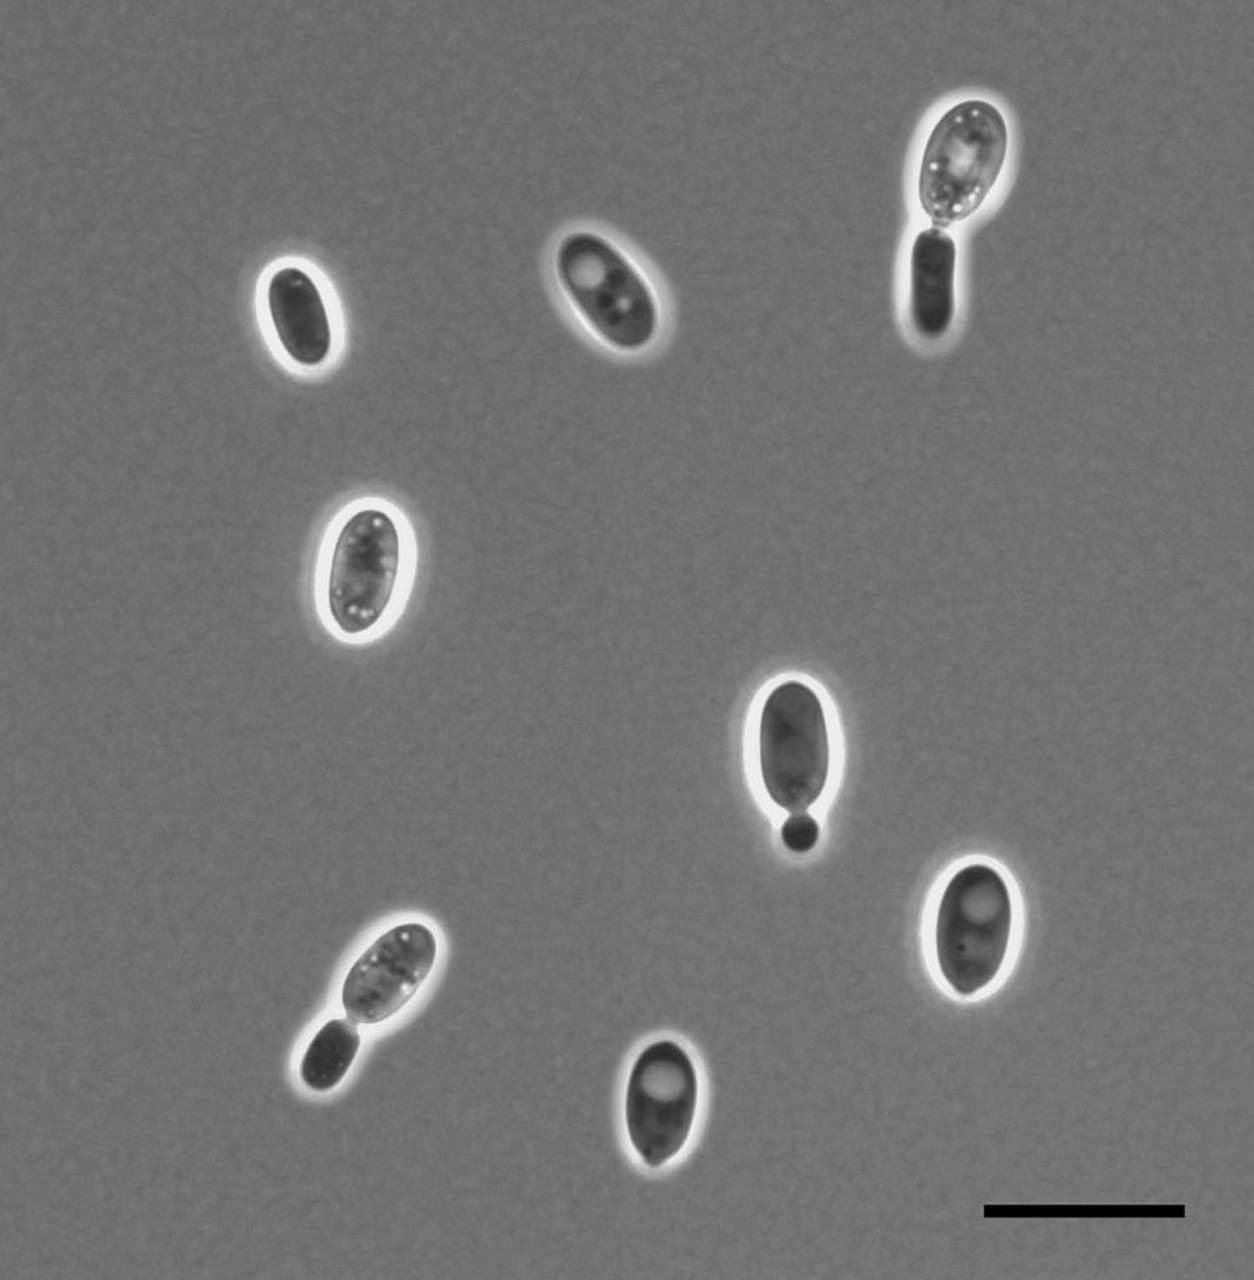 Phase contrast micrograph of Cystobasidium psychroaquaticum
K-833T (CBS 11769T). Yeast cells reproducing by budding after 7 days on GPY agar at room temperature, bar = 10 mkm, Пушкинский р-н, Moscow Oblast (Russia)